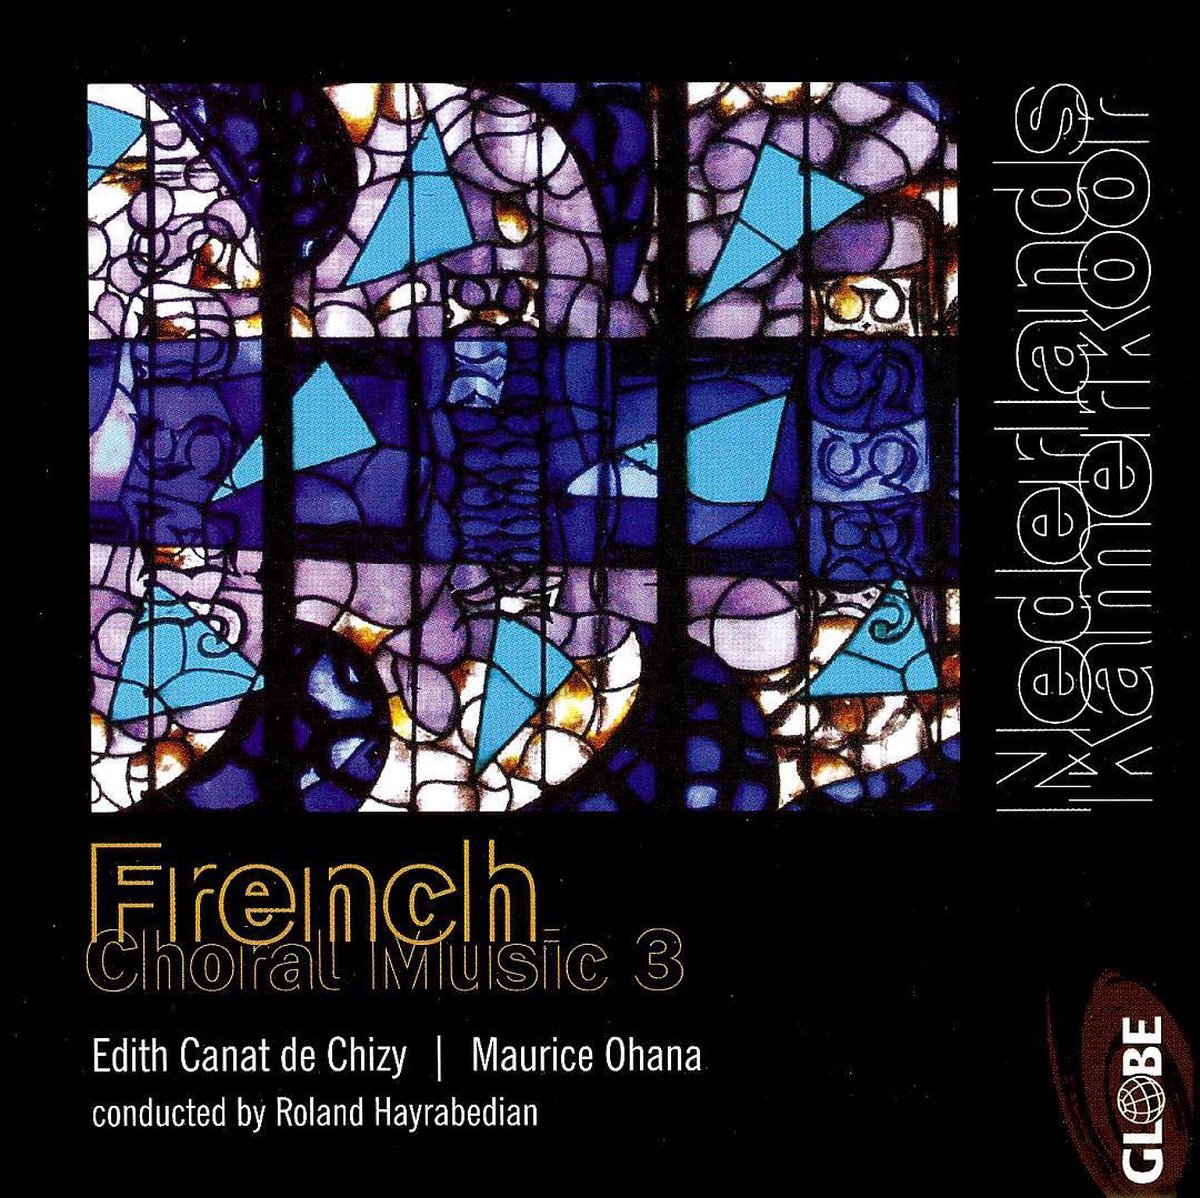 Pochette CD Edith Canat de Chizy, French Choral Music